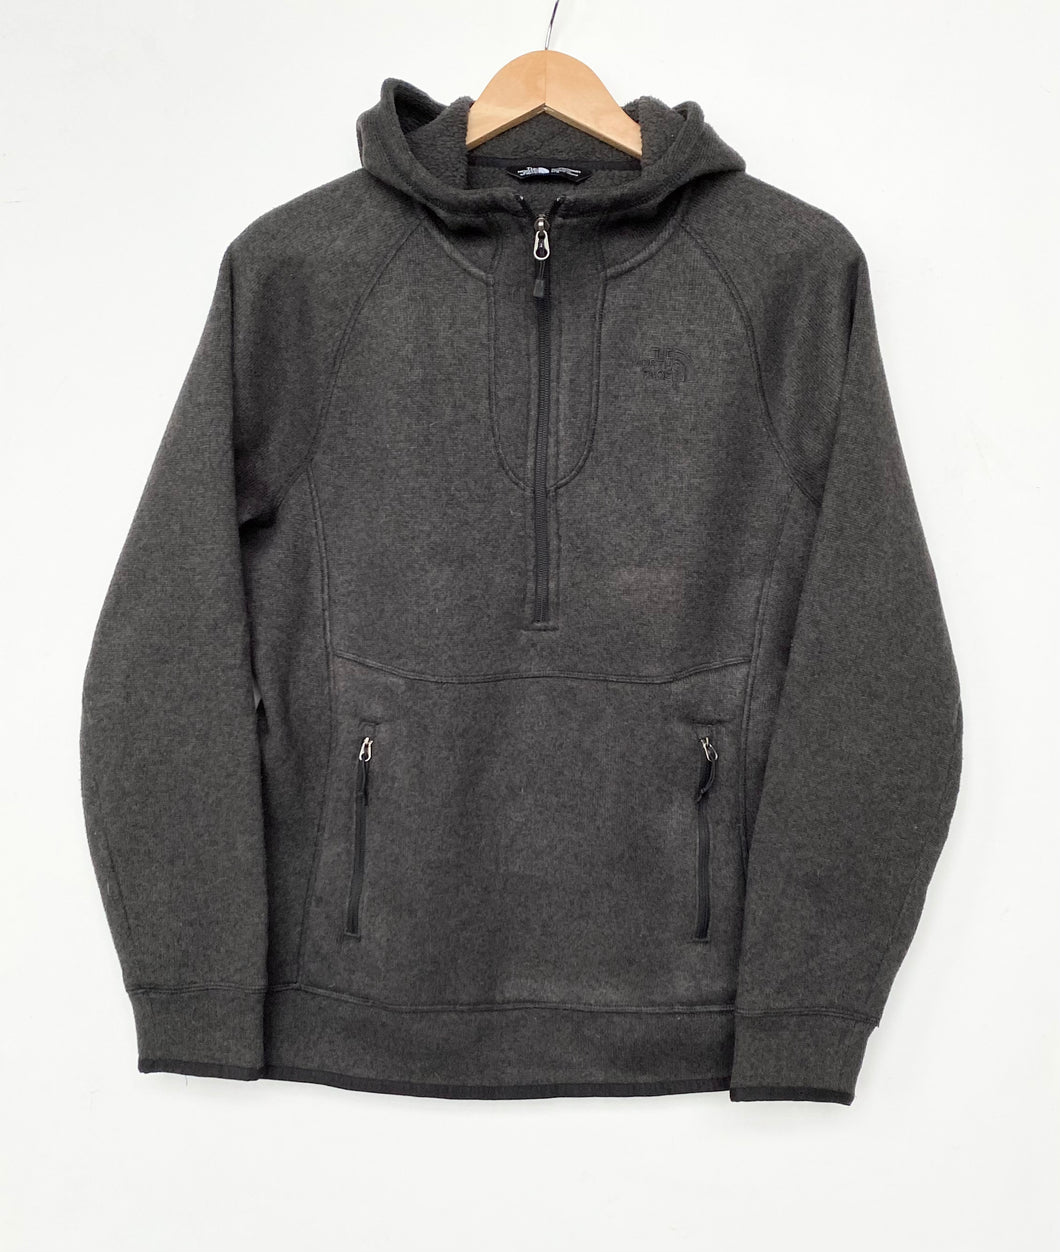 Women’s The North Face Hoodie (L)